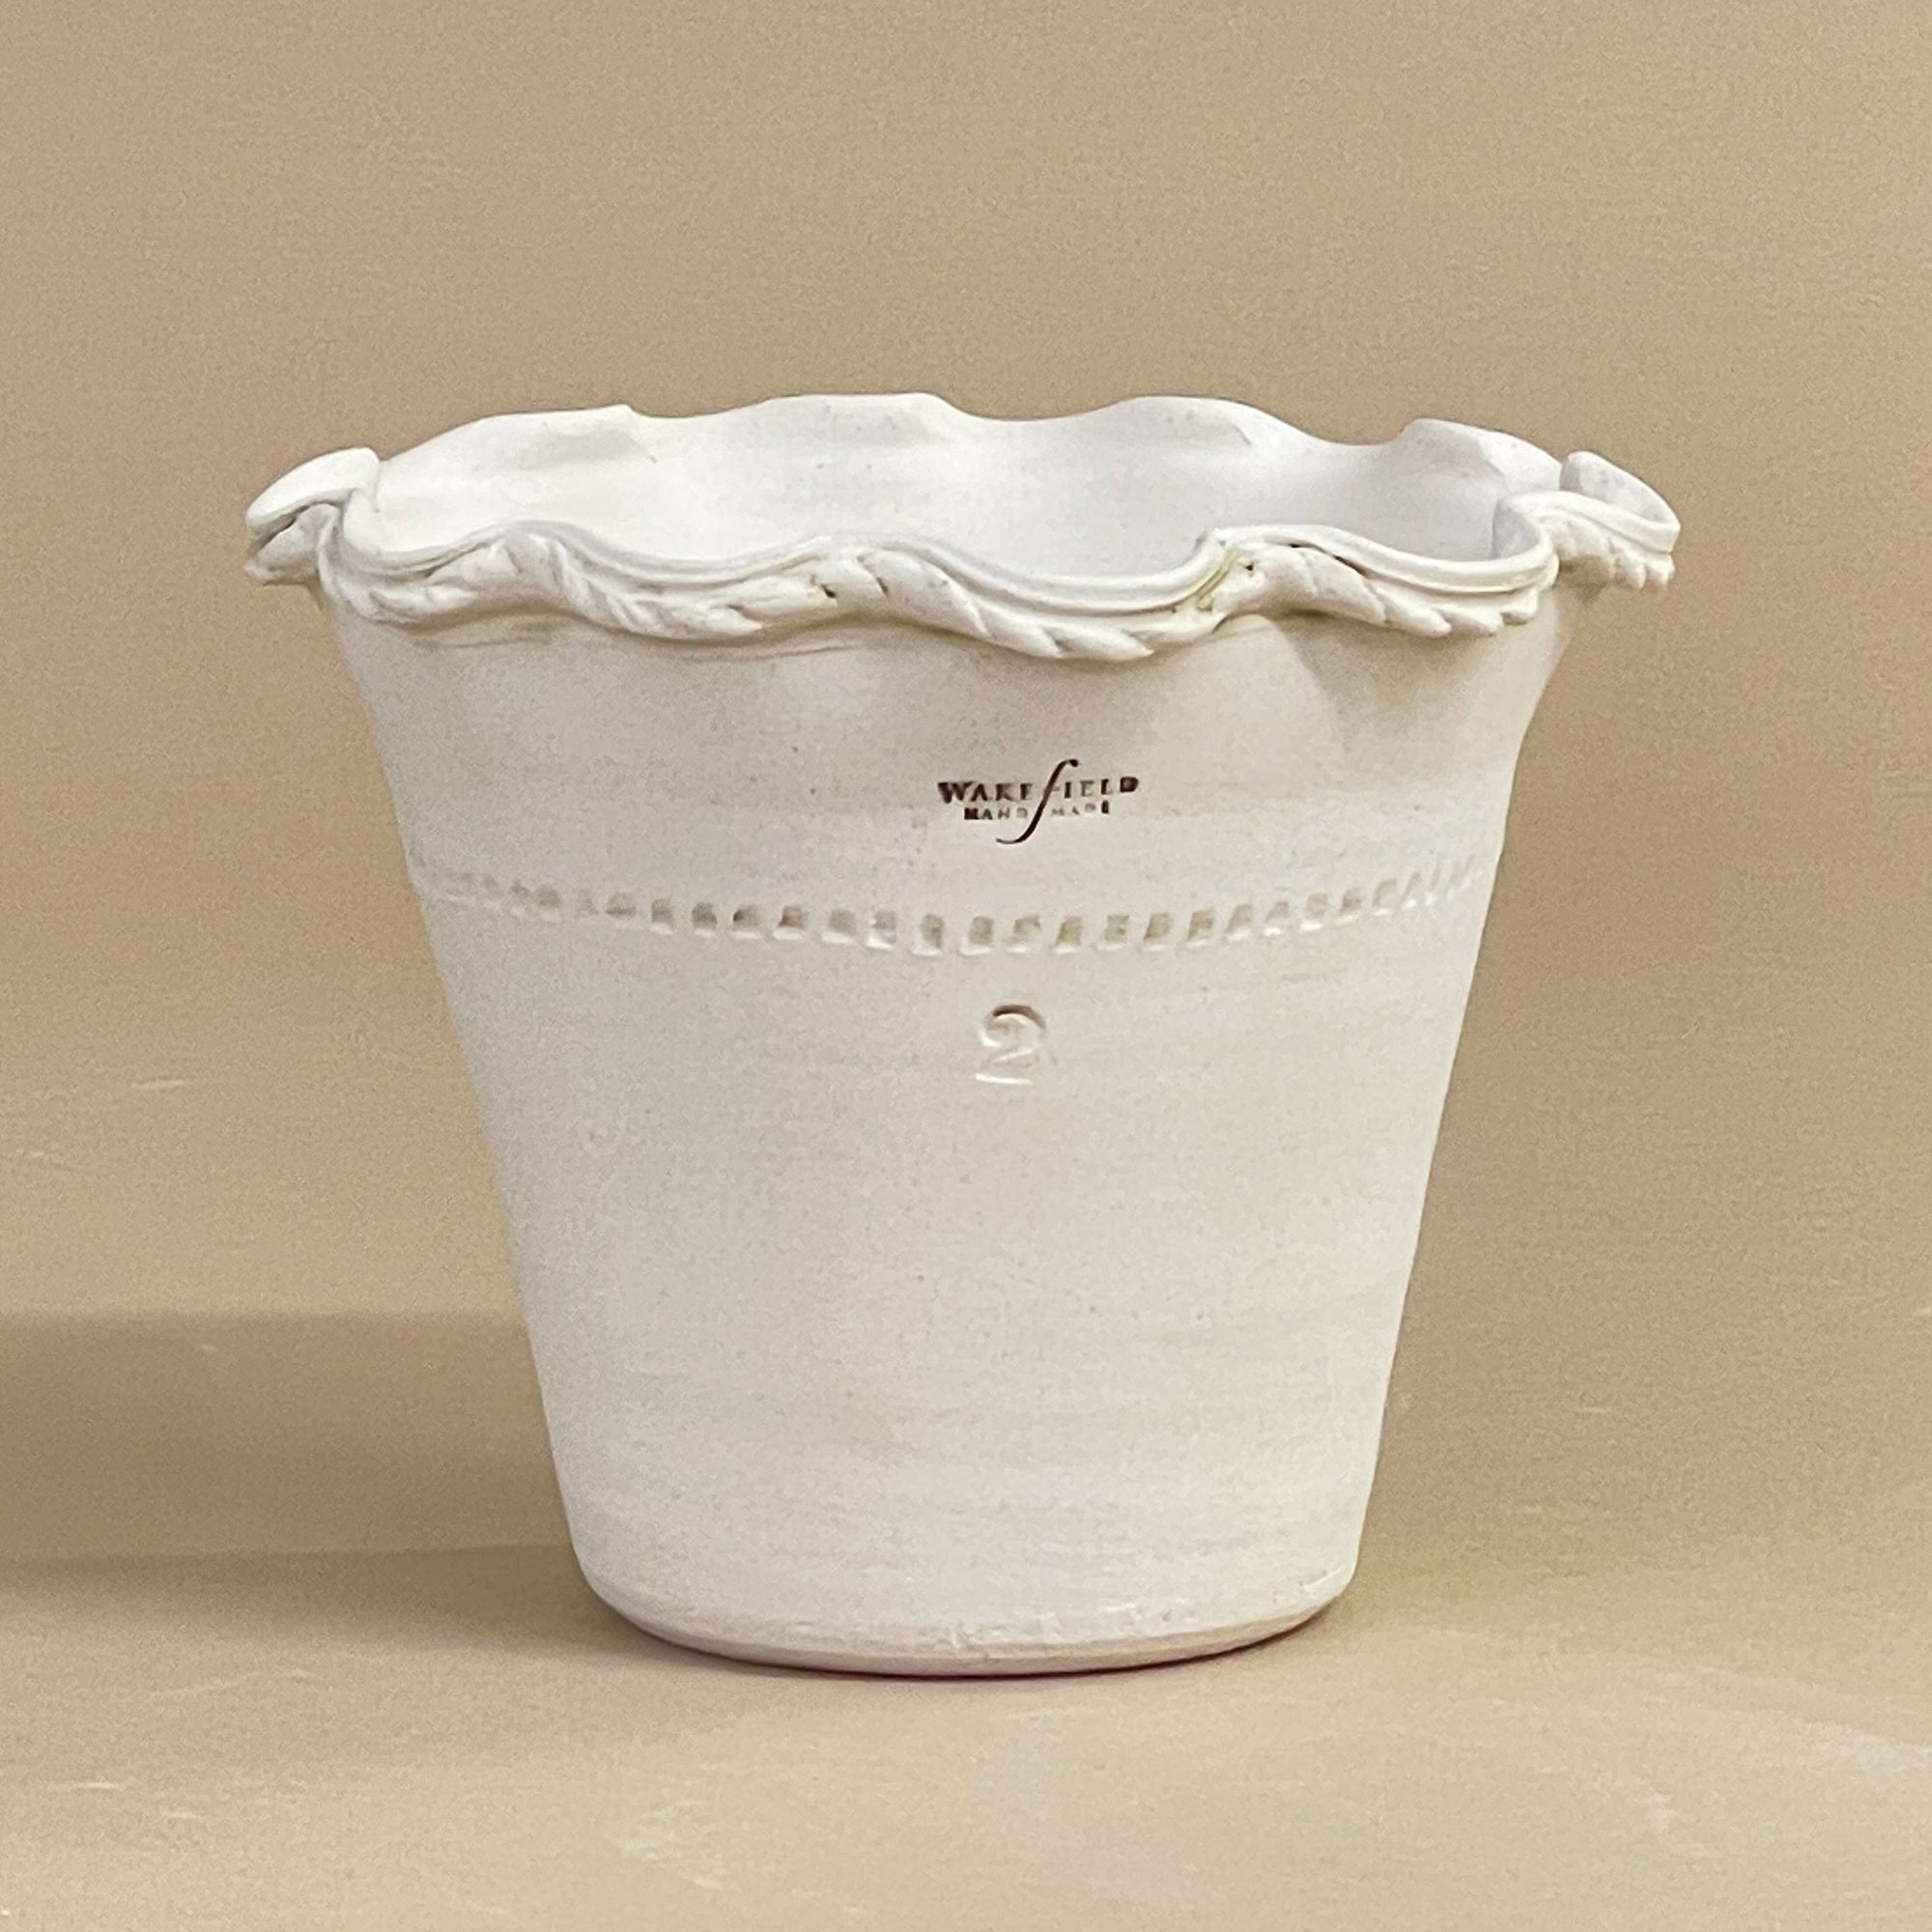 Scalloped Full Pot, Roped Rim with Saucer